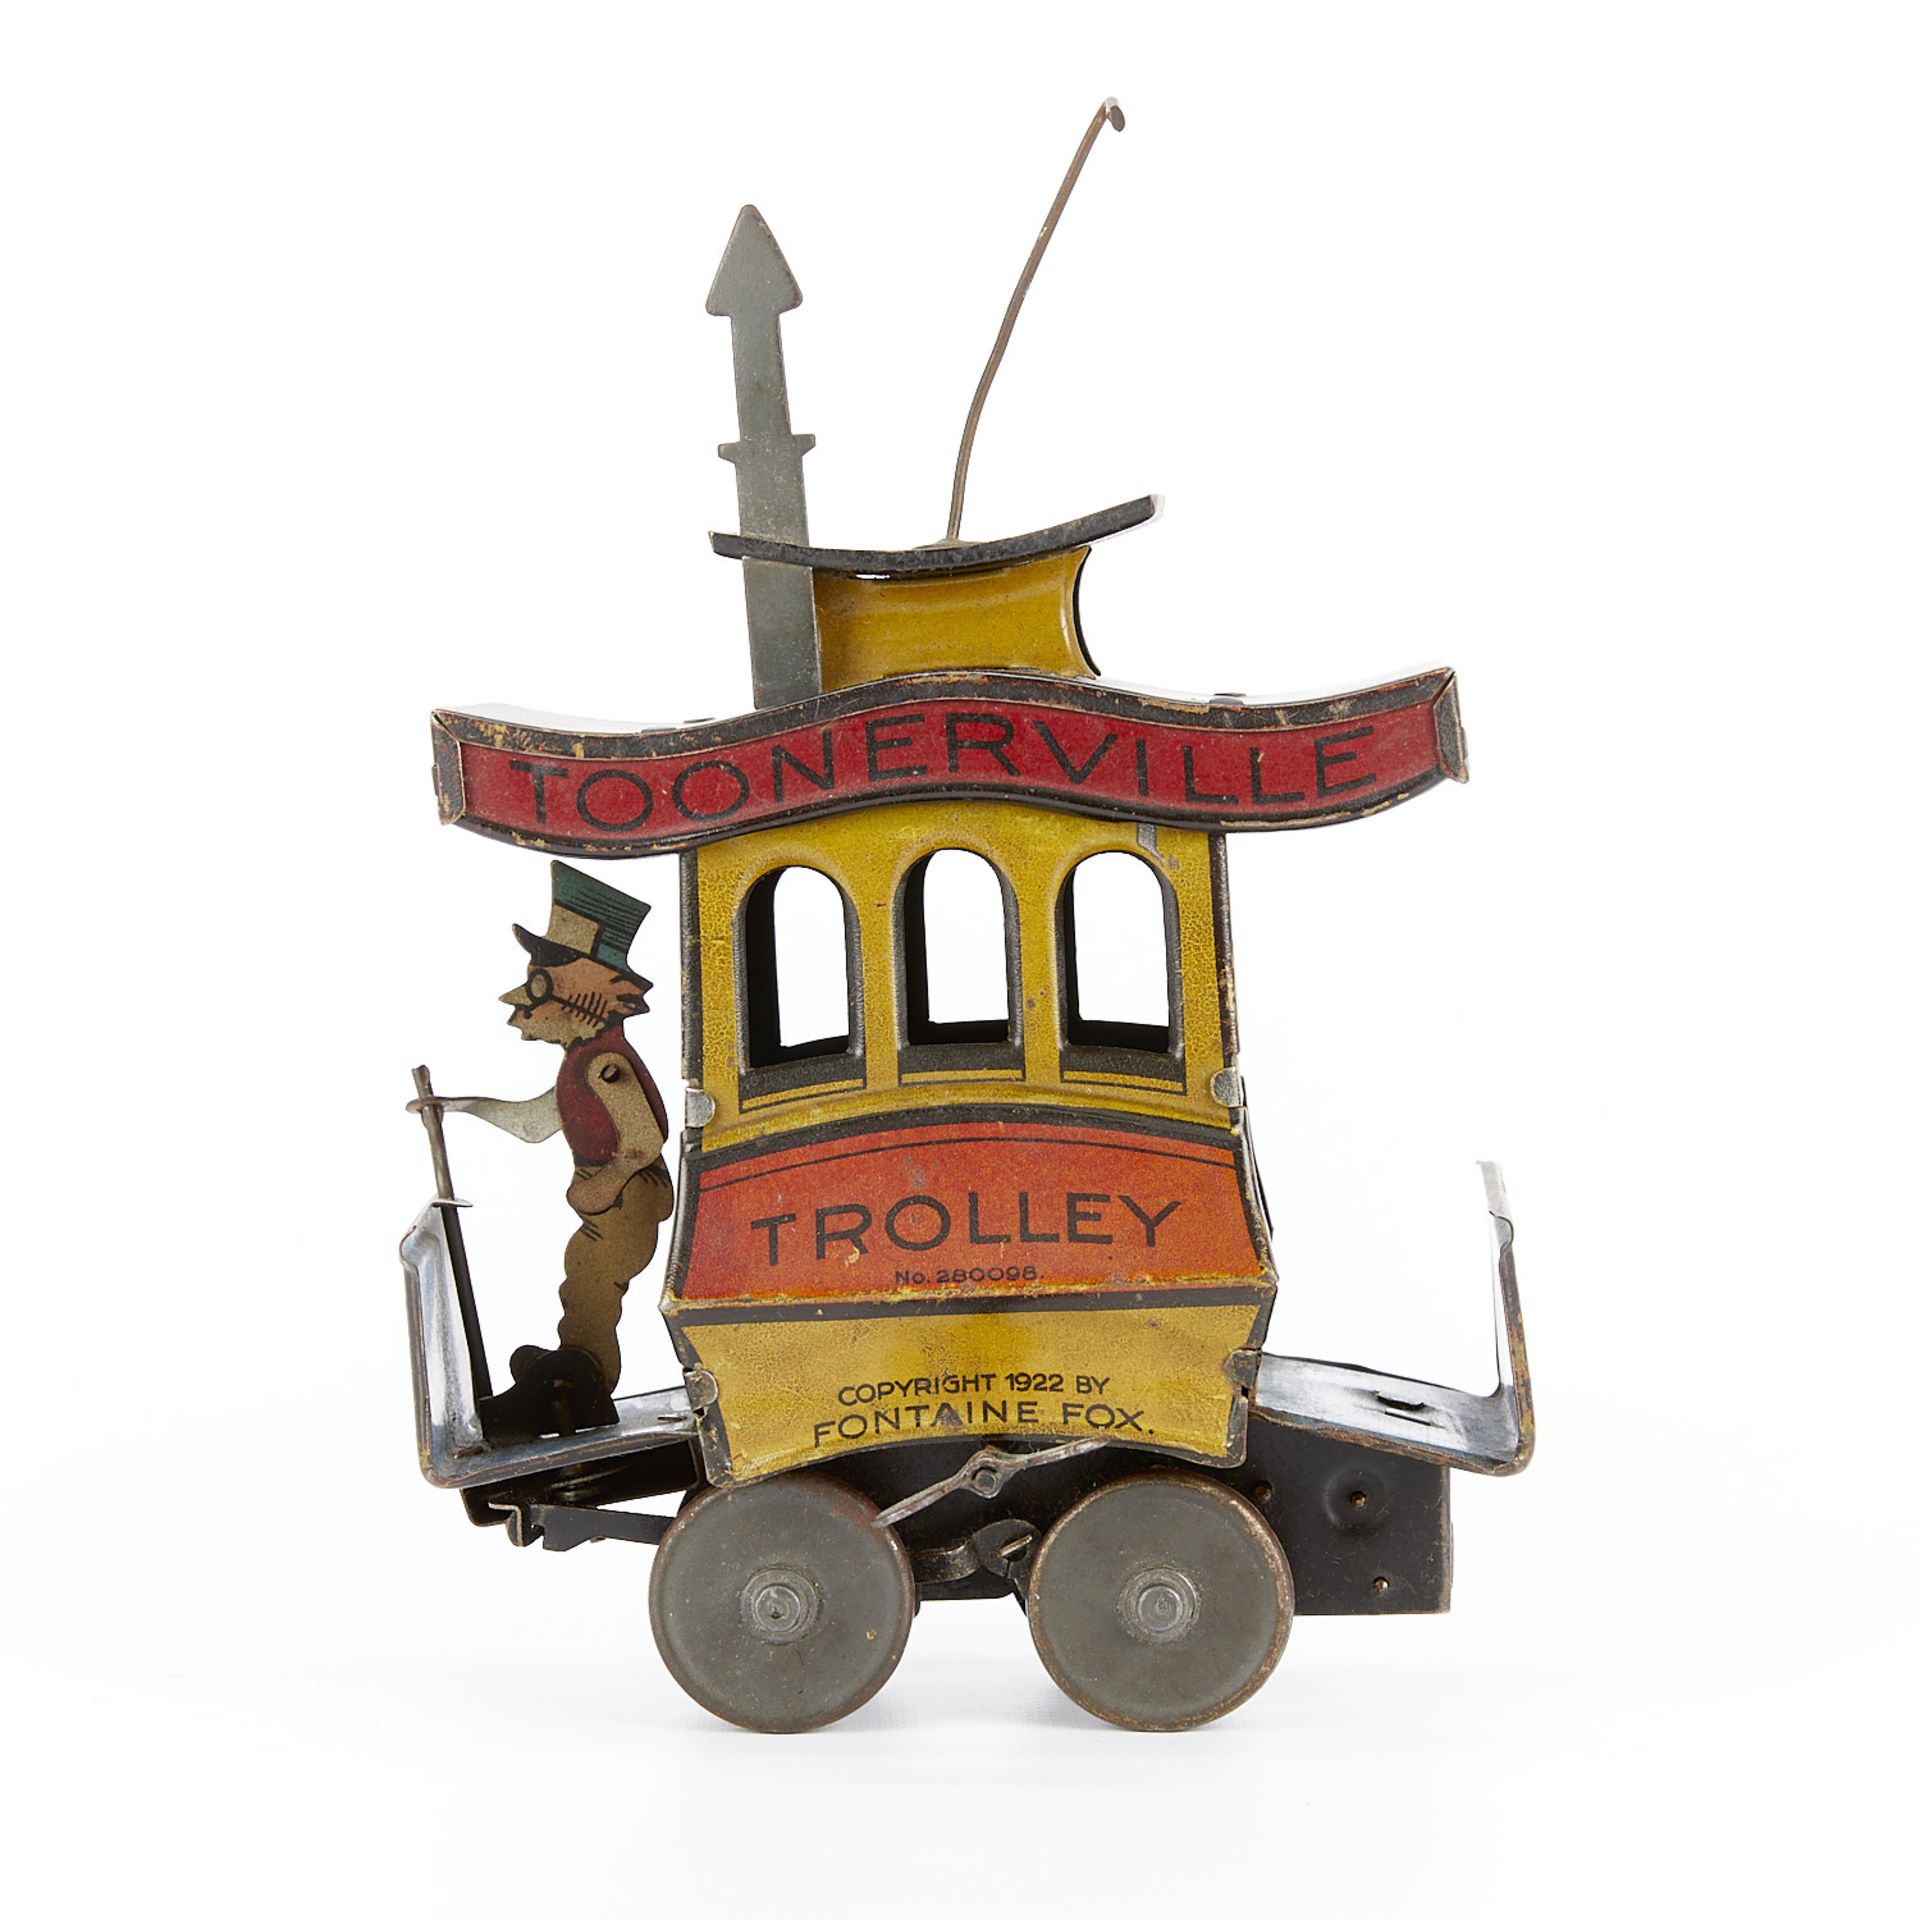 Fontaine Fox German Toonerville Trolley Tin Toy - Image 3 of 10